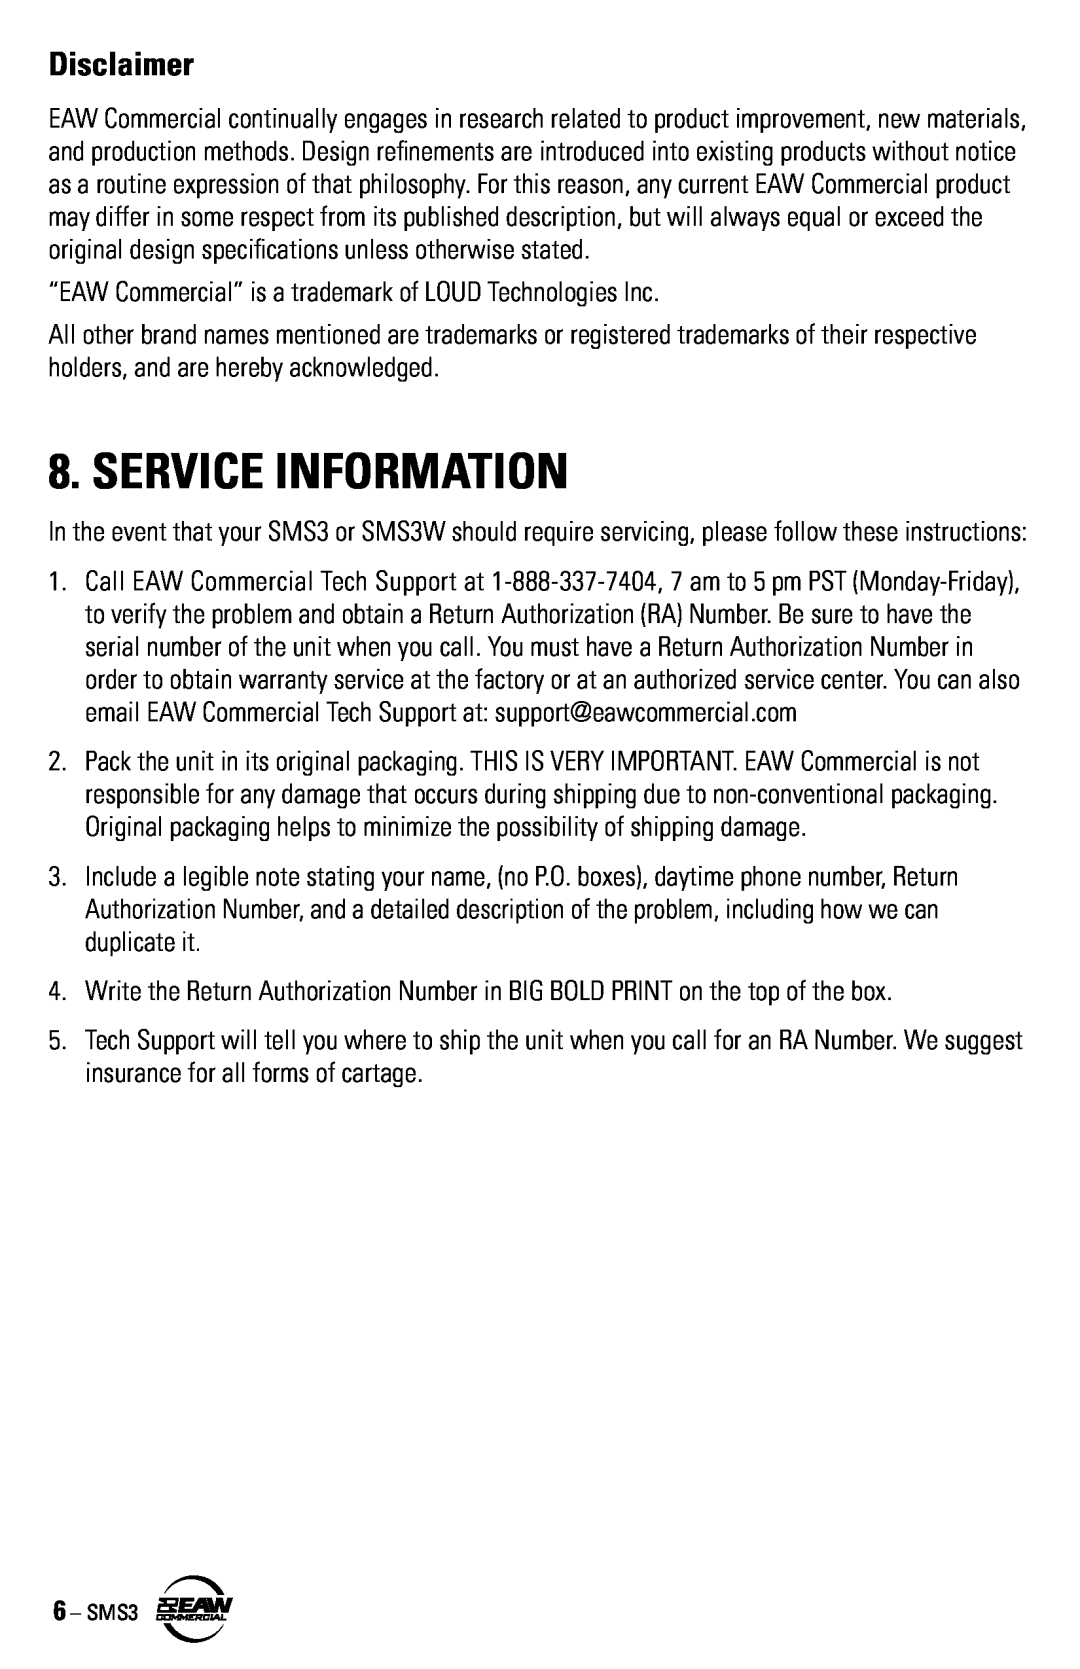 EAW SMS3 instruction manual Service Information, Disclaimer 